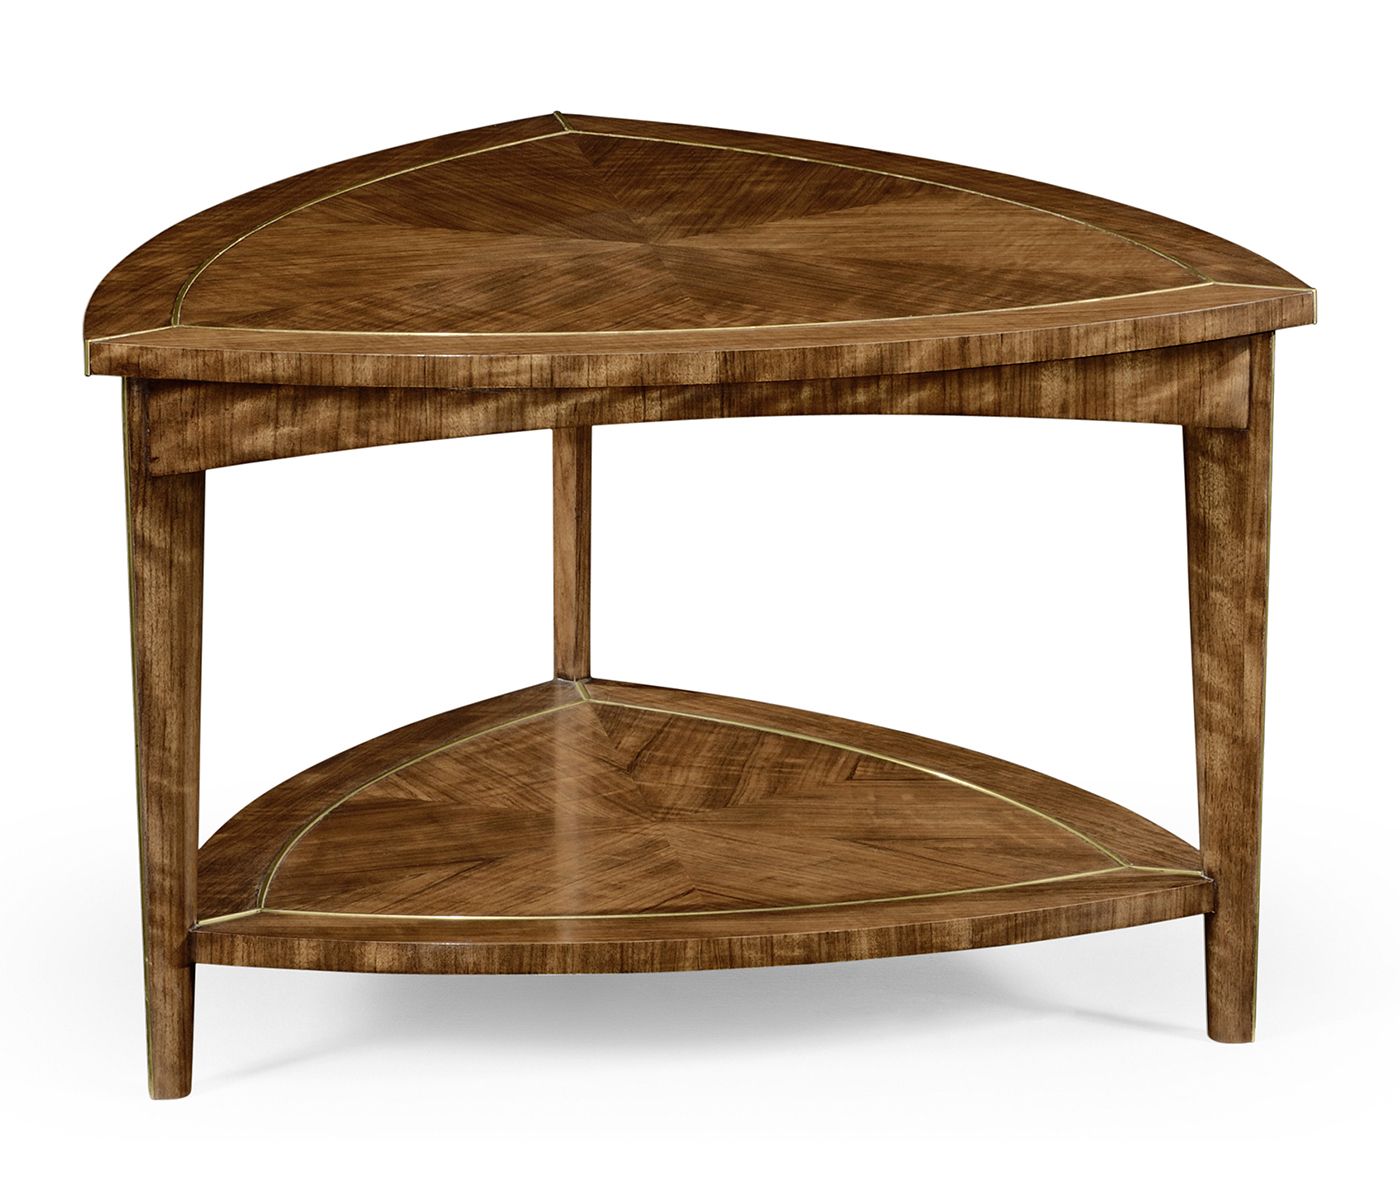 Triangular Coffee Tables With Best And Newest Hyedua Triangular Coffee Table (View 7 of 20)